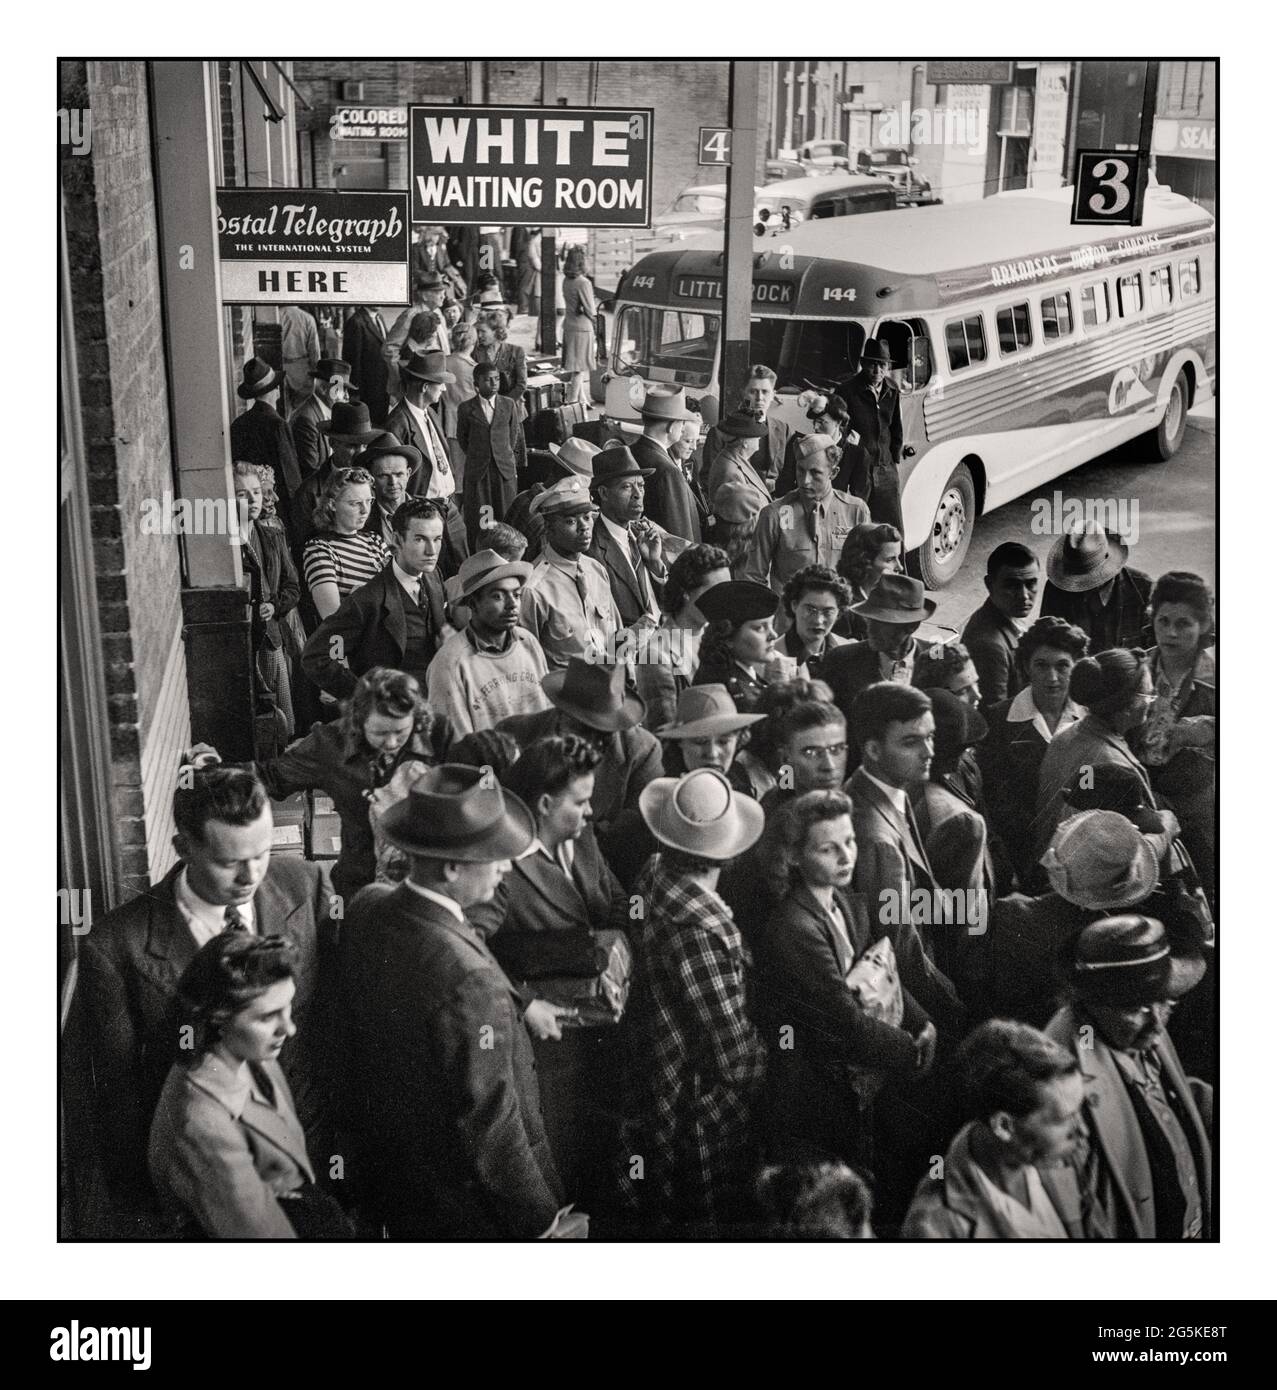 Racial Racist Segregation USA travel signs ‘white/coloured’ at the bus terminal during WW2 'WHITE WAITING ROOM' A Greyhound bus Racial Racist Segregation signs at the bus terminal trip from Louisville, Kentucky, to Little Rock Arkansas at the terminals. Caucasian crowds at the front waiting for a bus at the Memphis station with segregation signs above. Esther Bubley, photographer World War II 1943 Sept. Stock Photo